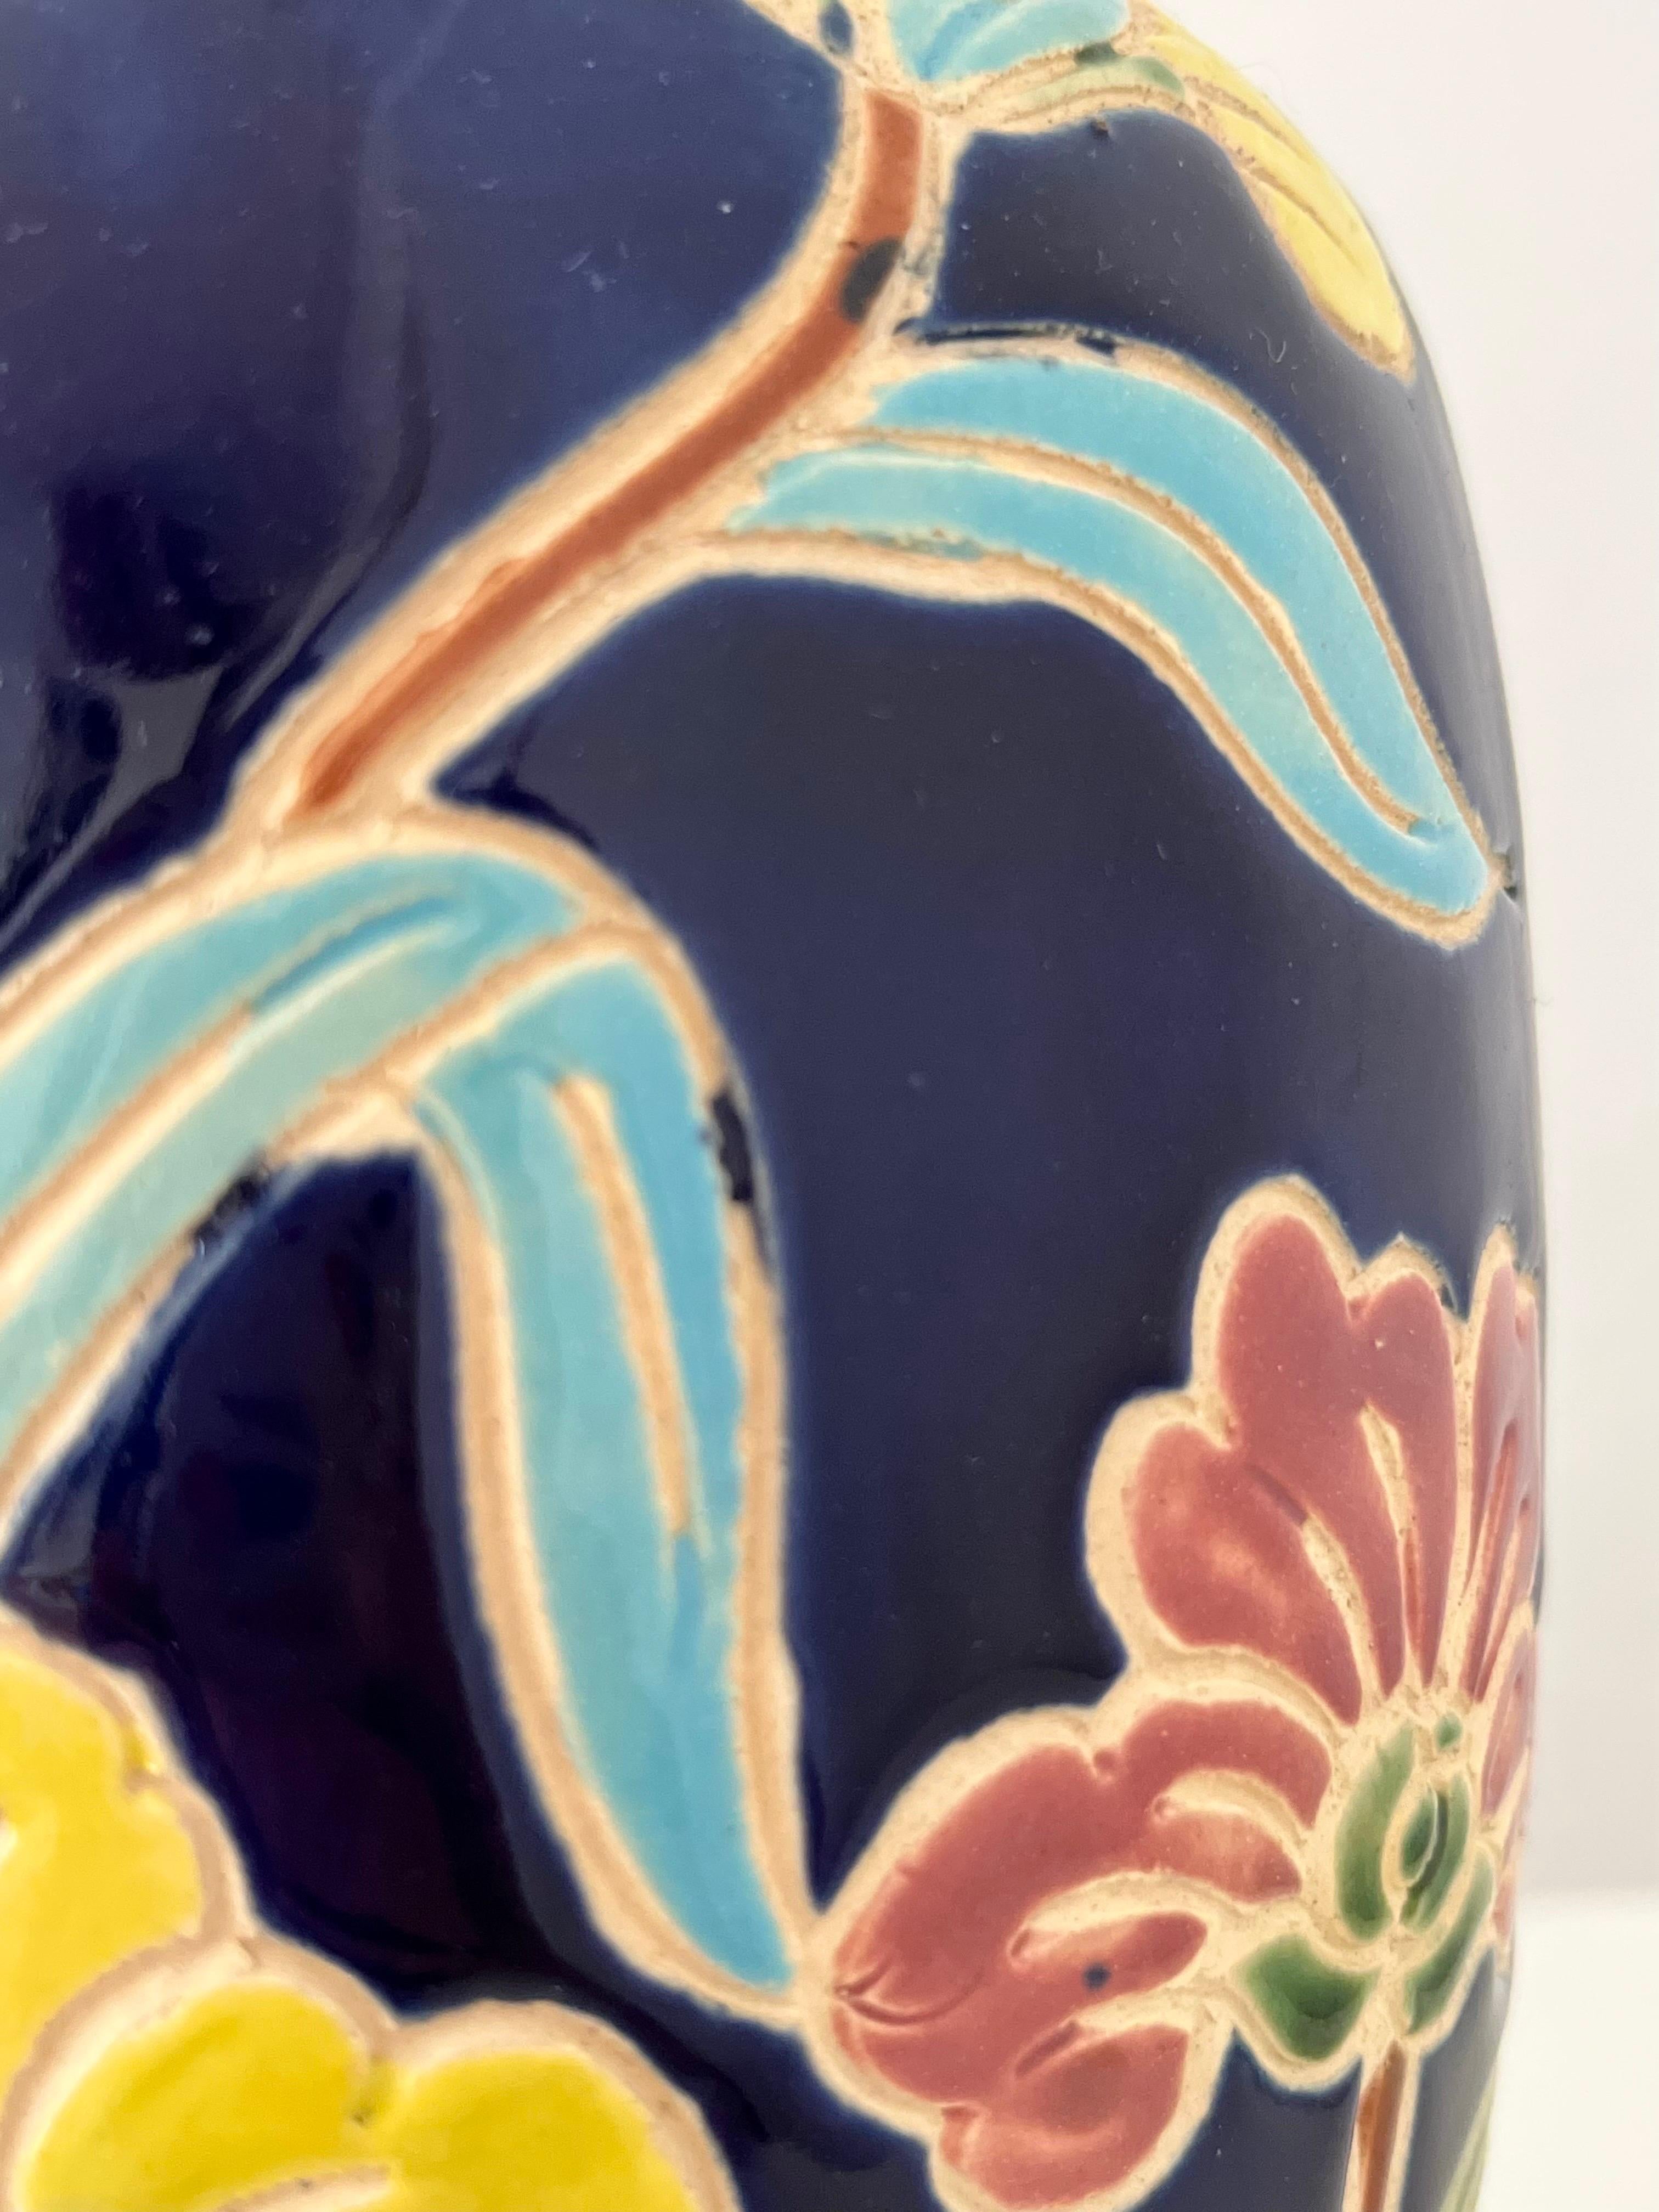 1960s/1970s Scandinavian Organic Modern Ceramic Vase with Colorful Floral Motifs For Sale 9